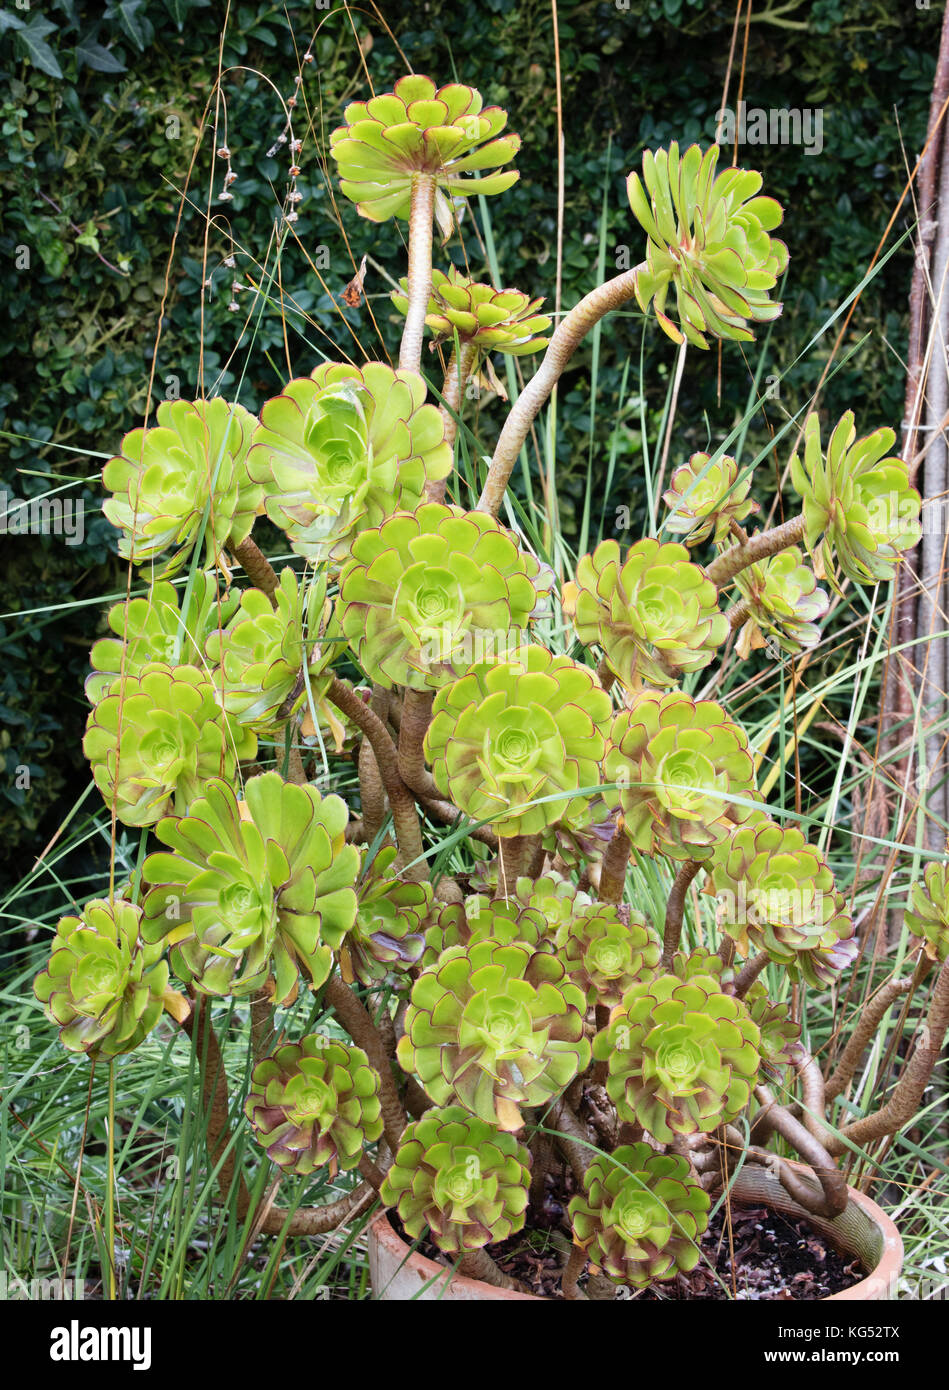 Green variety of tree houseleek Aeonium arboreum growing in a pot container in an English country garden Stock Photo